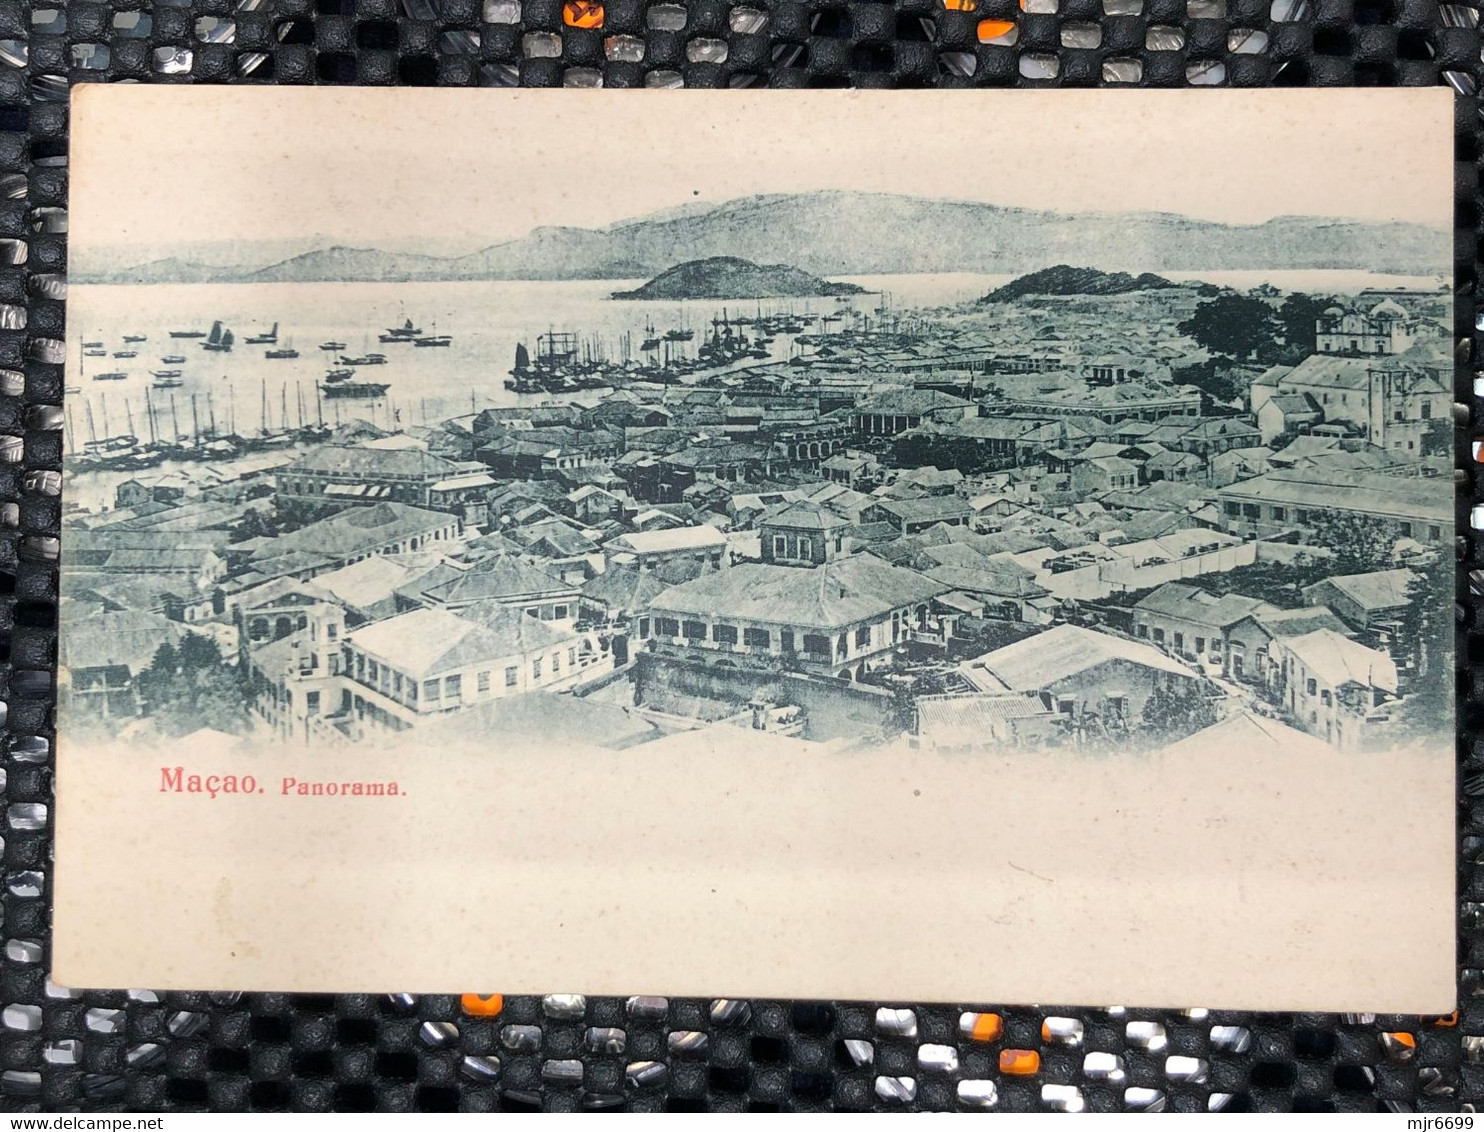 MACAU 1900'S PICTURE POST CARD WITH PANORAMA VIEW OF MACAU FROM THE BARRA HILL, ON BACK MOUNTAINS IS CHINA - Macau